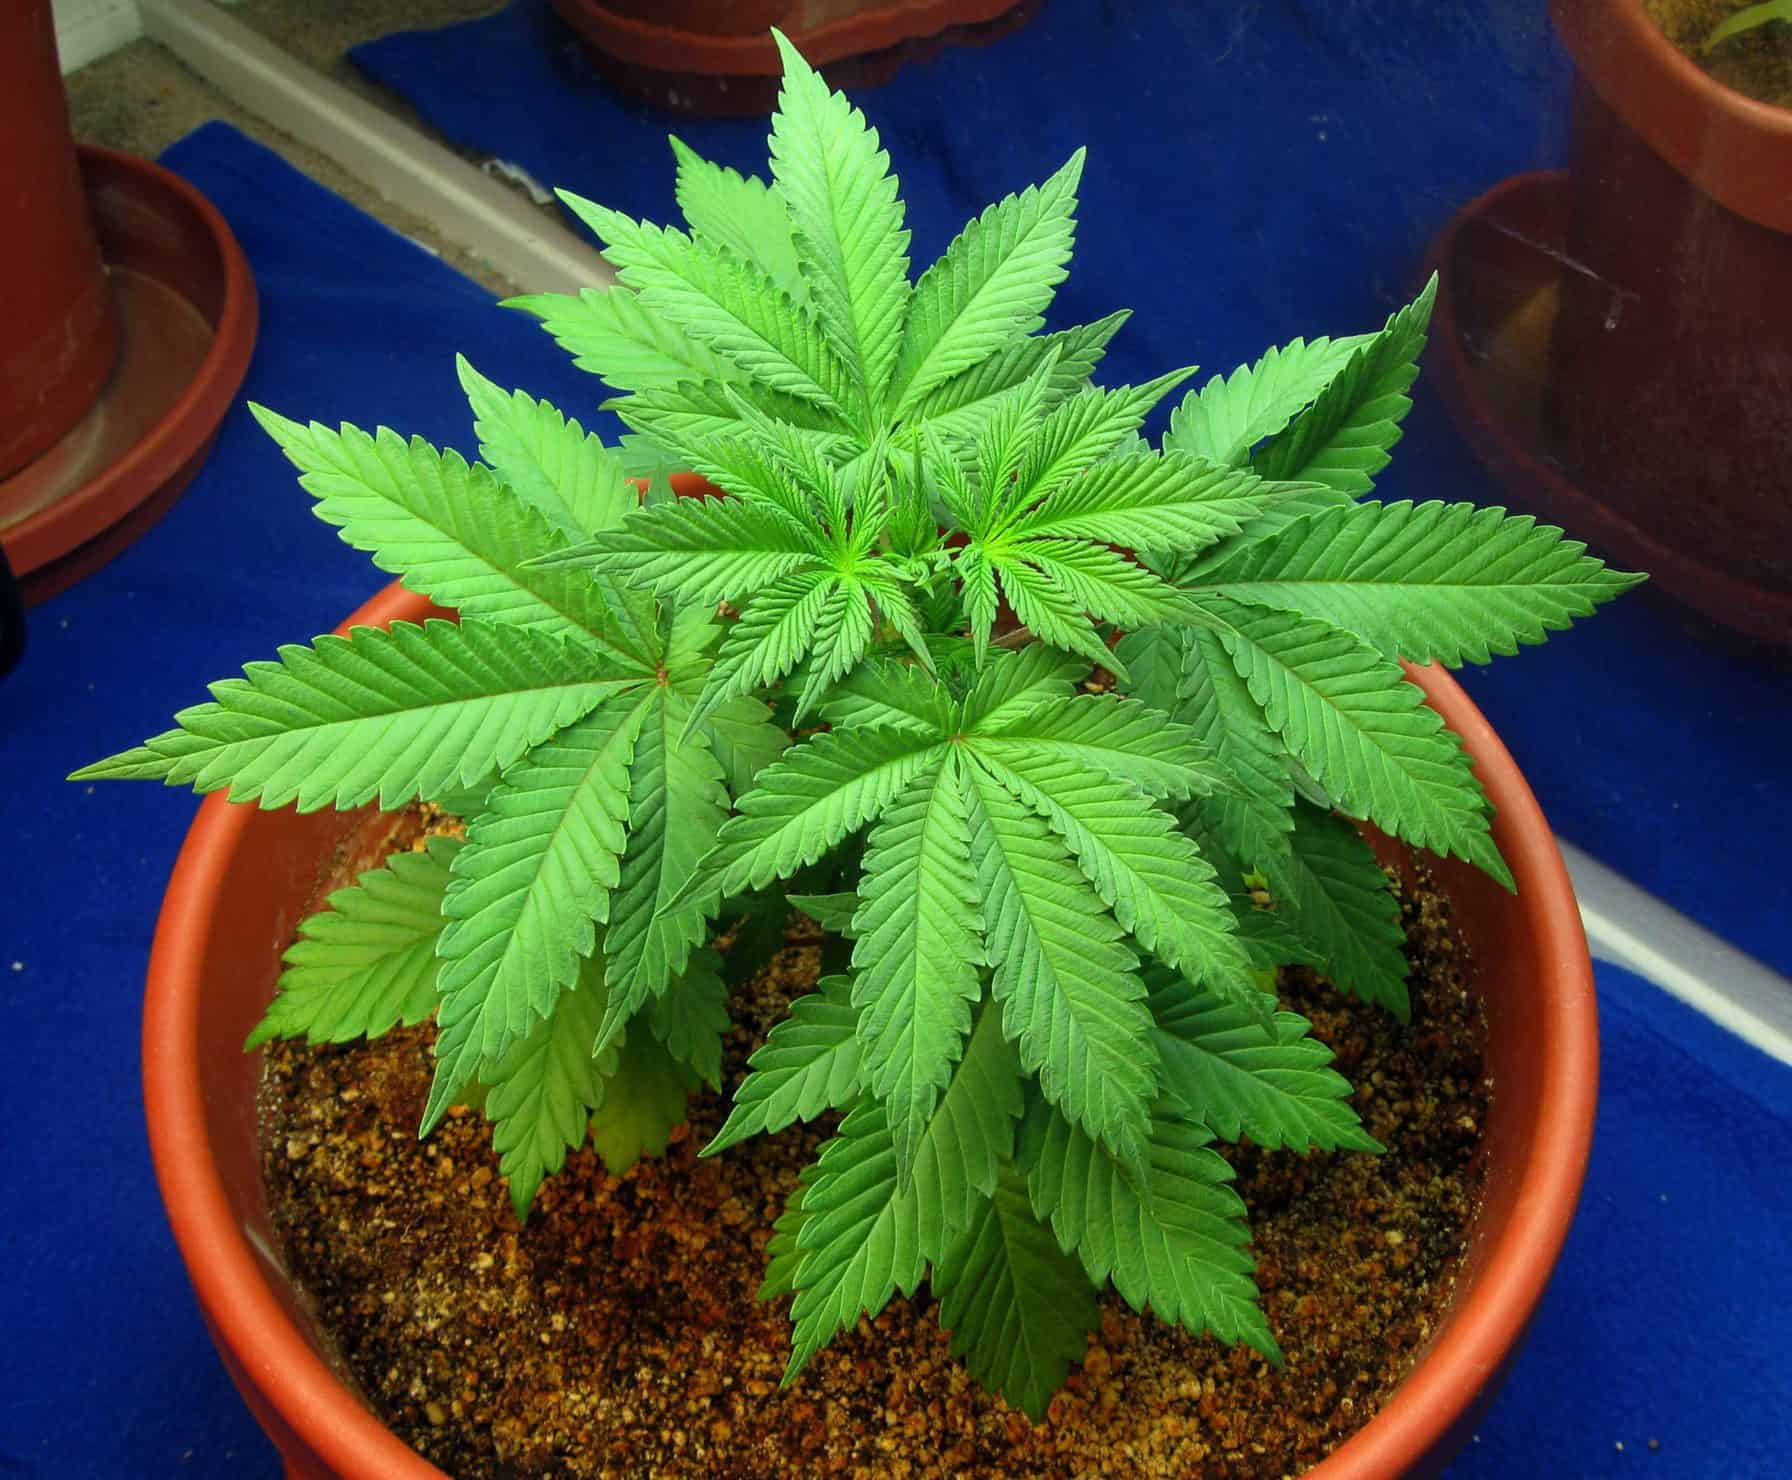 Potting Up: Steps to Repotting Cannabis Plants